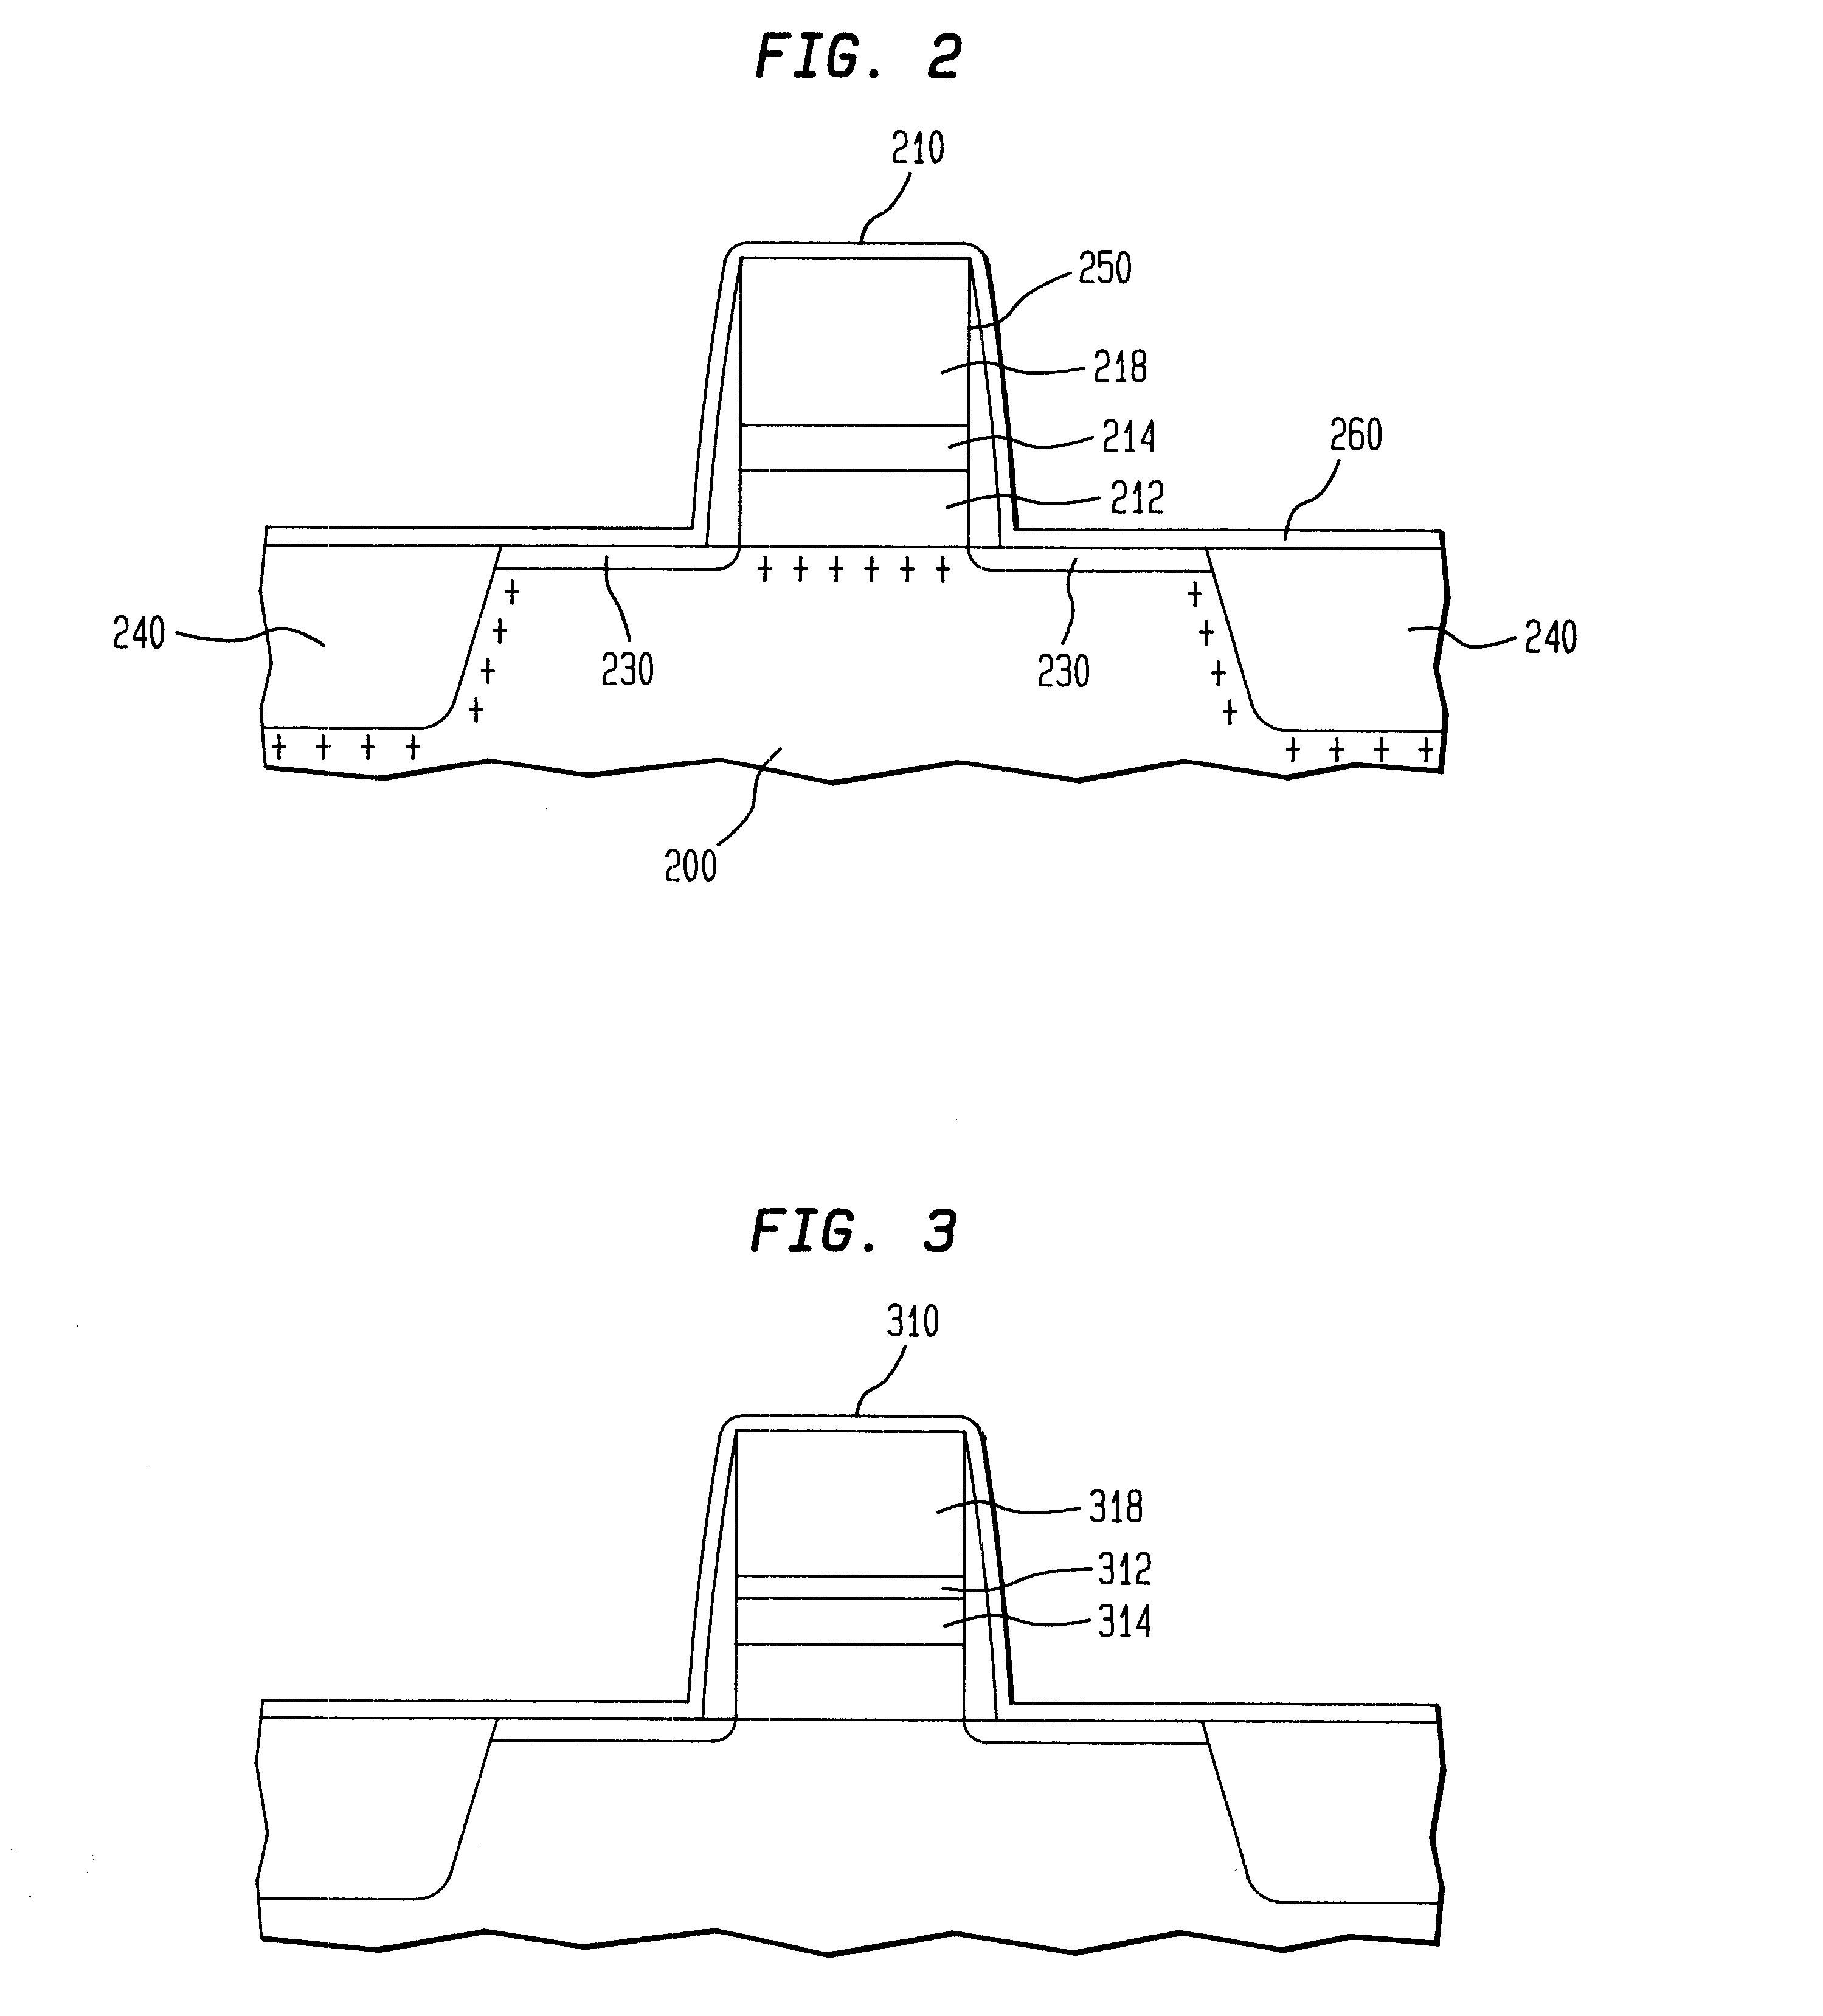 Semiconductor device structure with hydrogen-rich layer for facilitating passivation of surface states